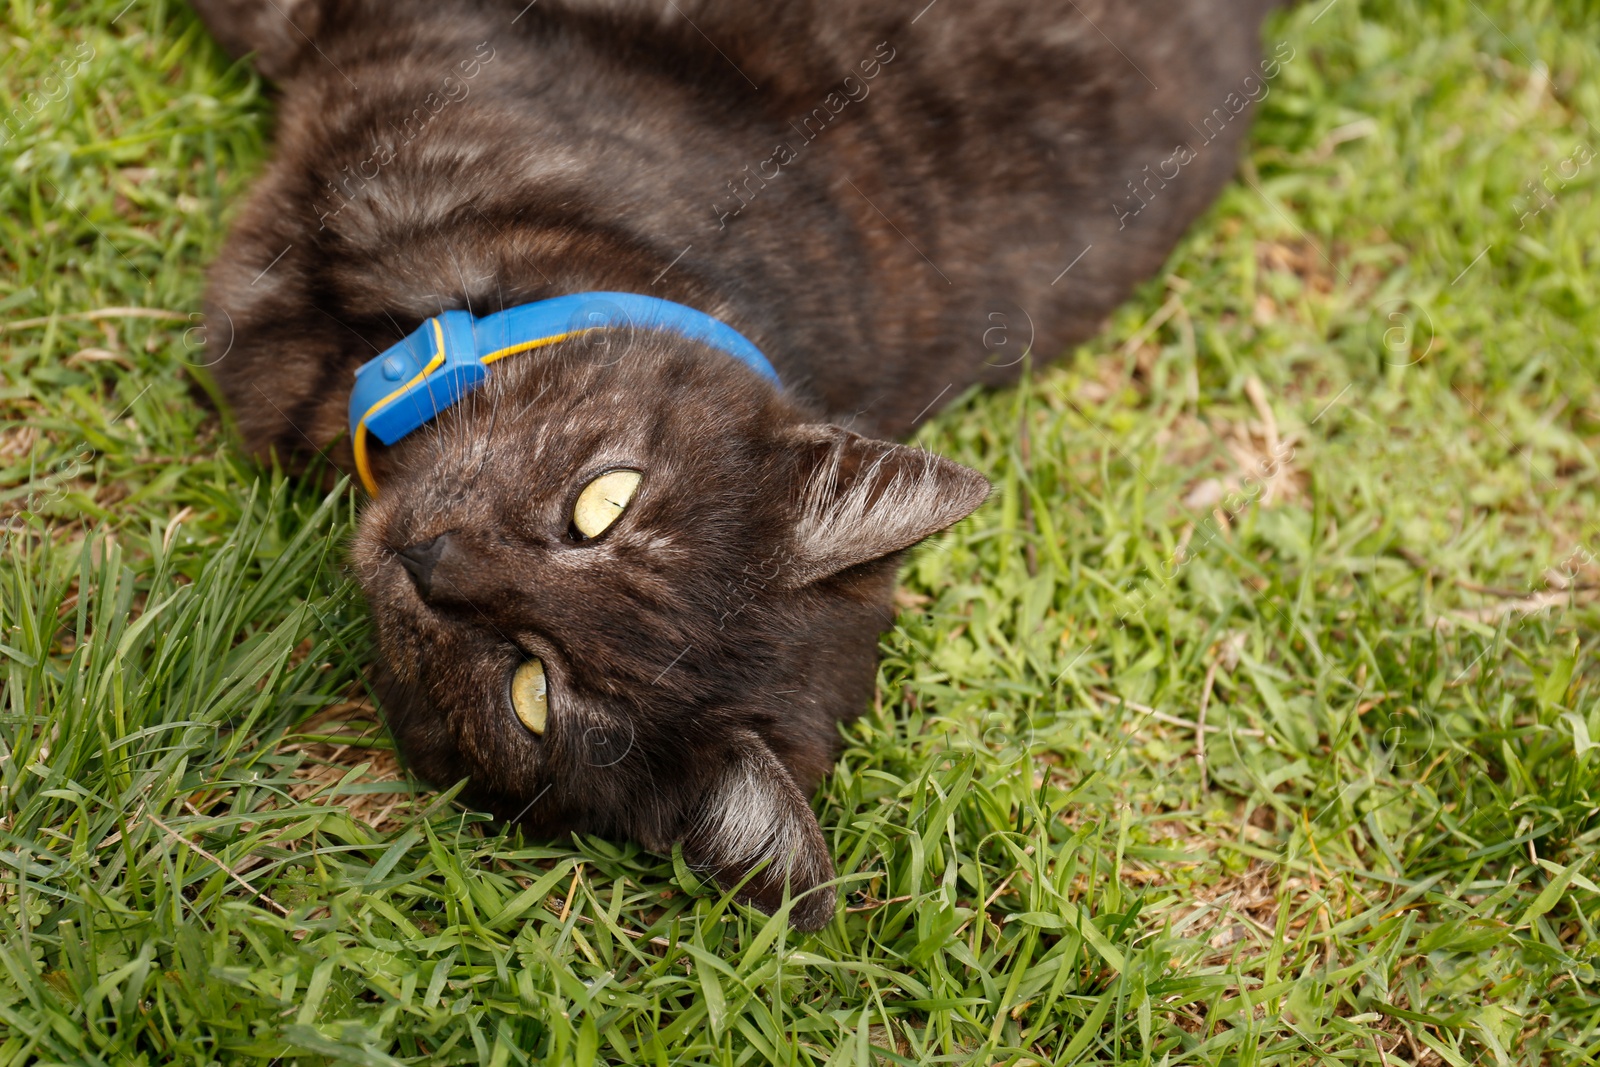 Photo of Adorable dark cat resting on green grass outdoors, closeup